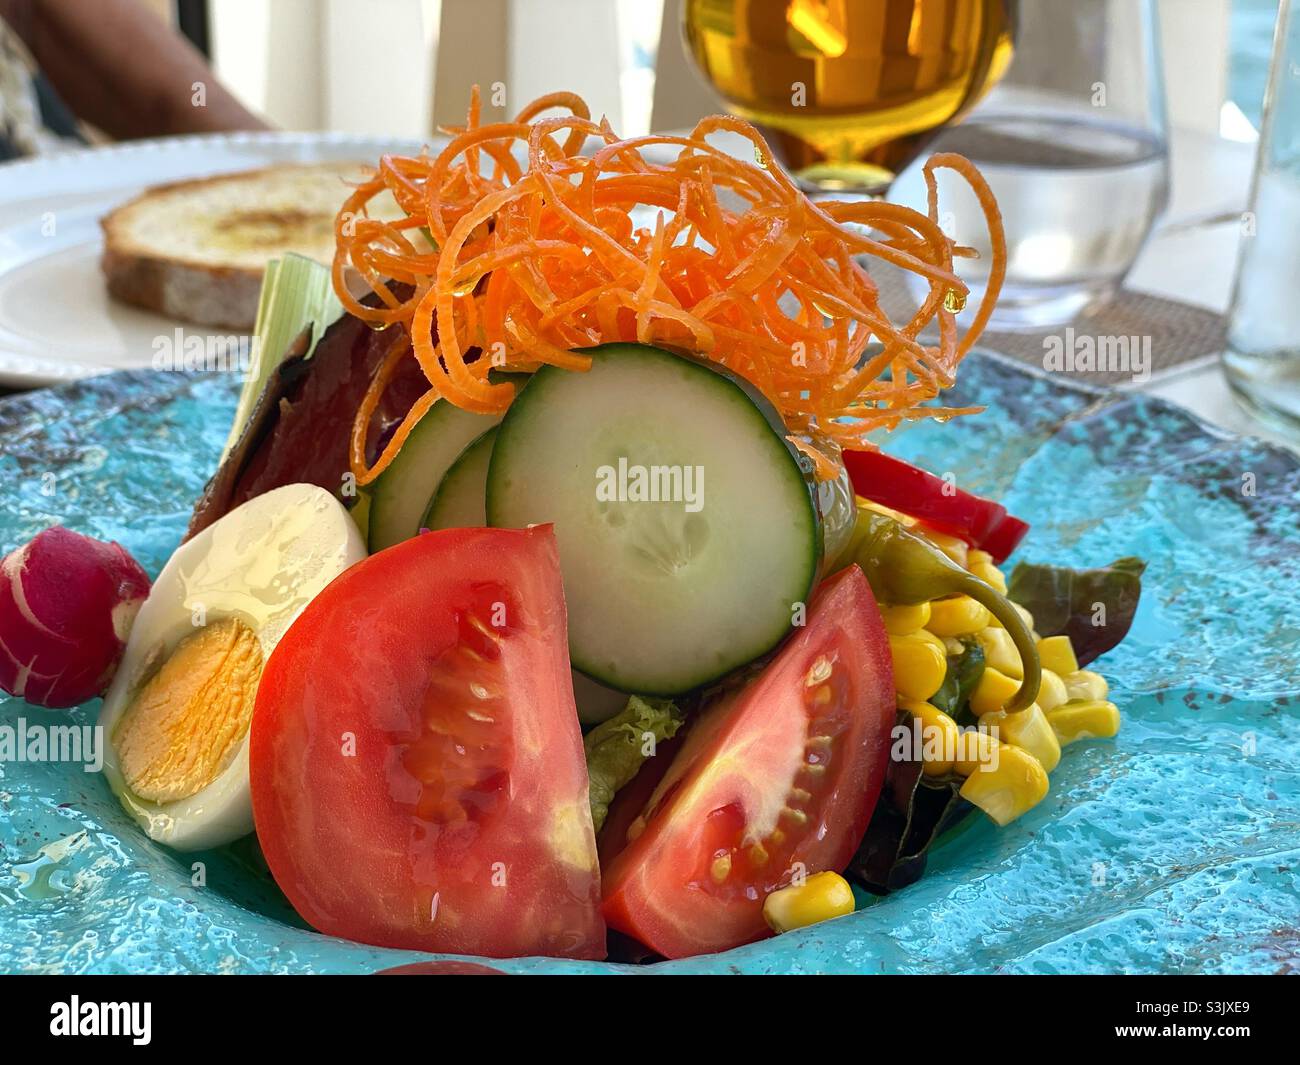 Tomato, cucumber, carrot and egg salad on a blue plate Stock Photo